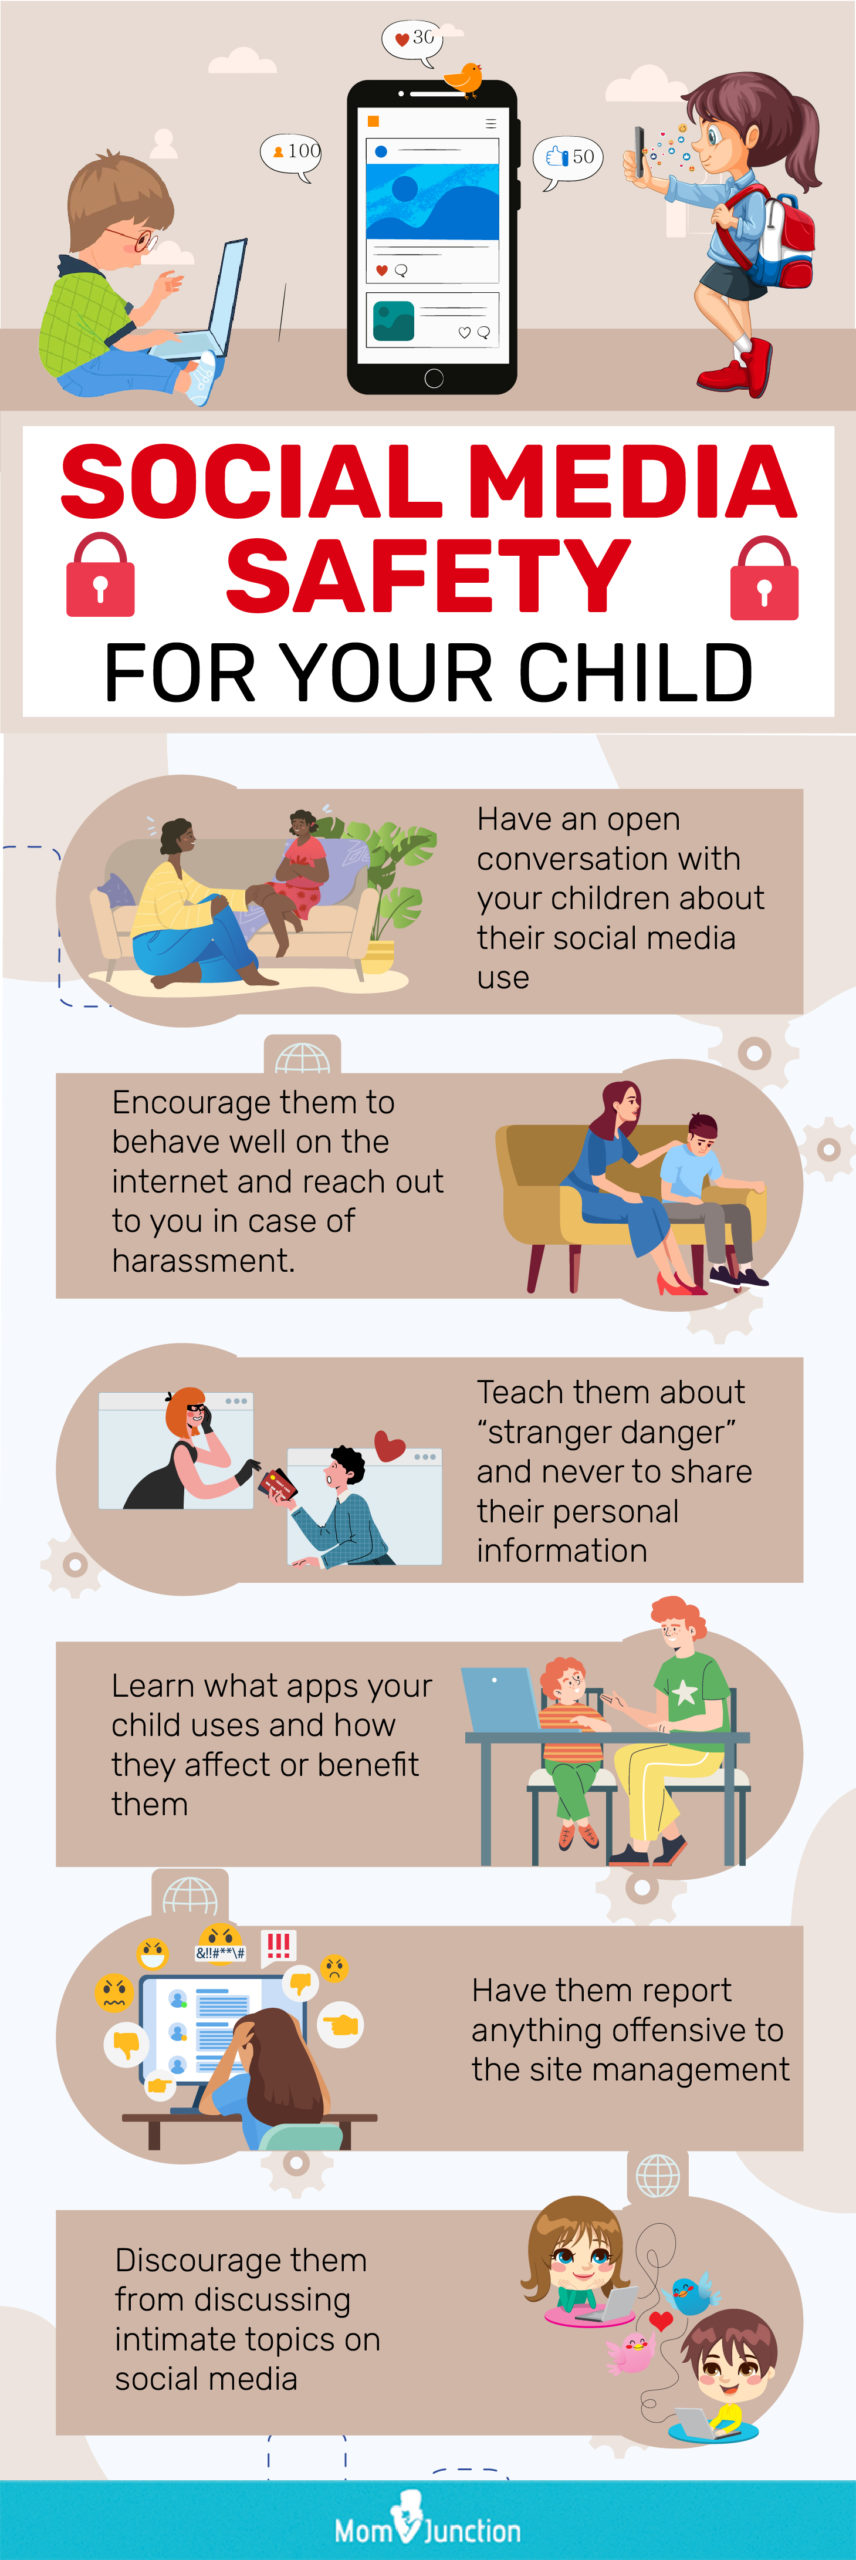 social media safety for your child (infographic)